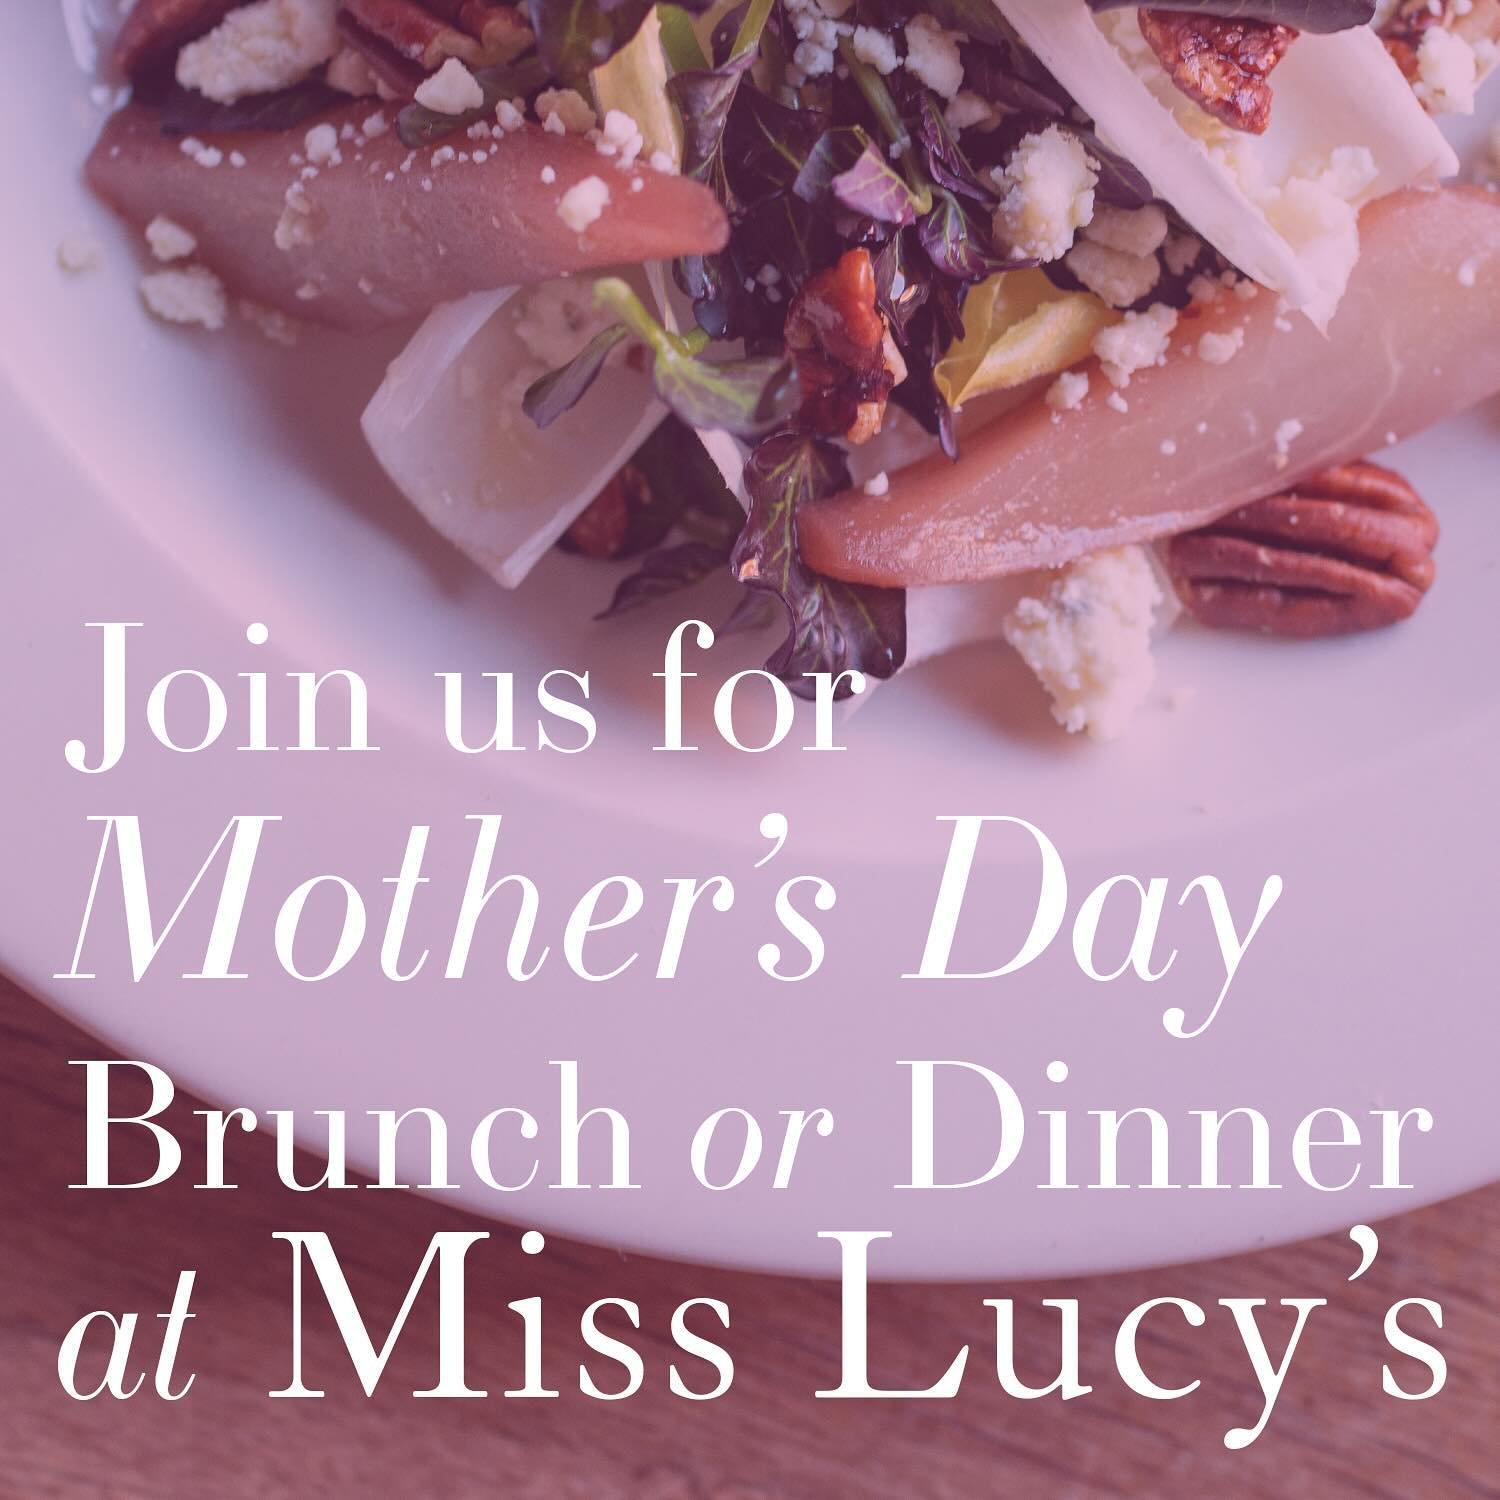 Celebrate Mom this Sunday with a special brunch or dinner.

Featuring our full menu and two new specials for the occasion&mdash;

🌷A brunch quiche of ramps, goat cheese and morel mushrooms 

🌷and a pan-seared duck breast with a cherry demi-glace an